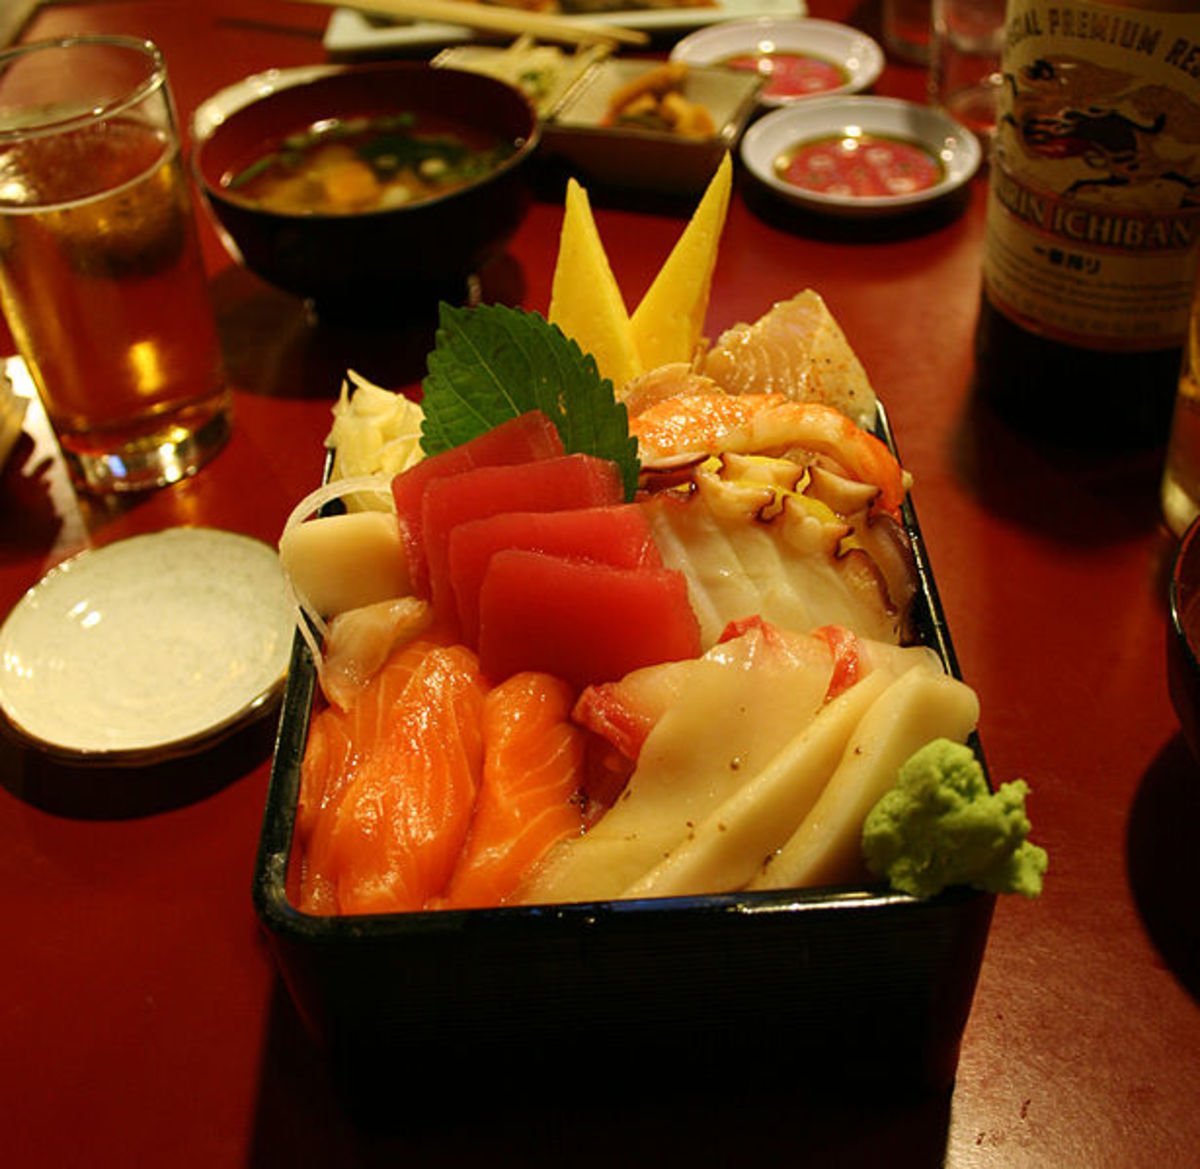 A Sashimi Bowl that has Rice covering the bottom.